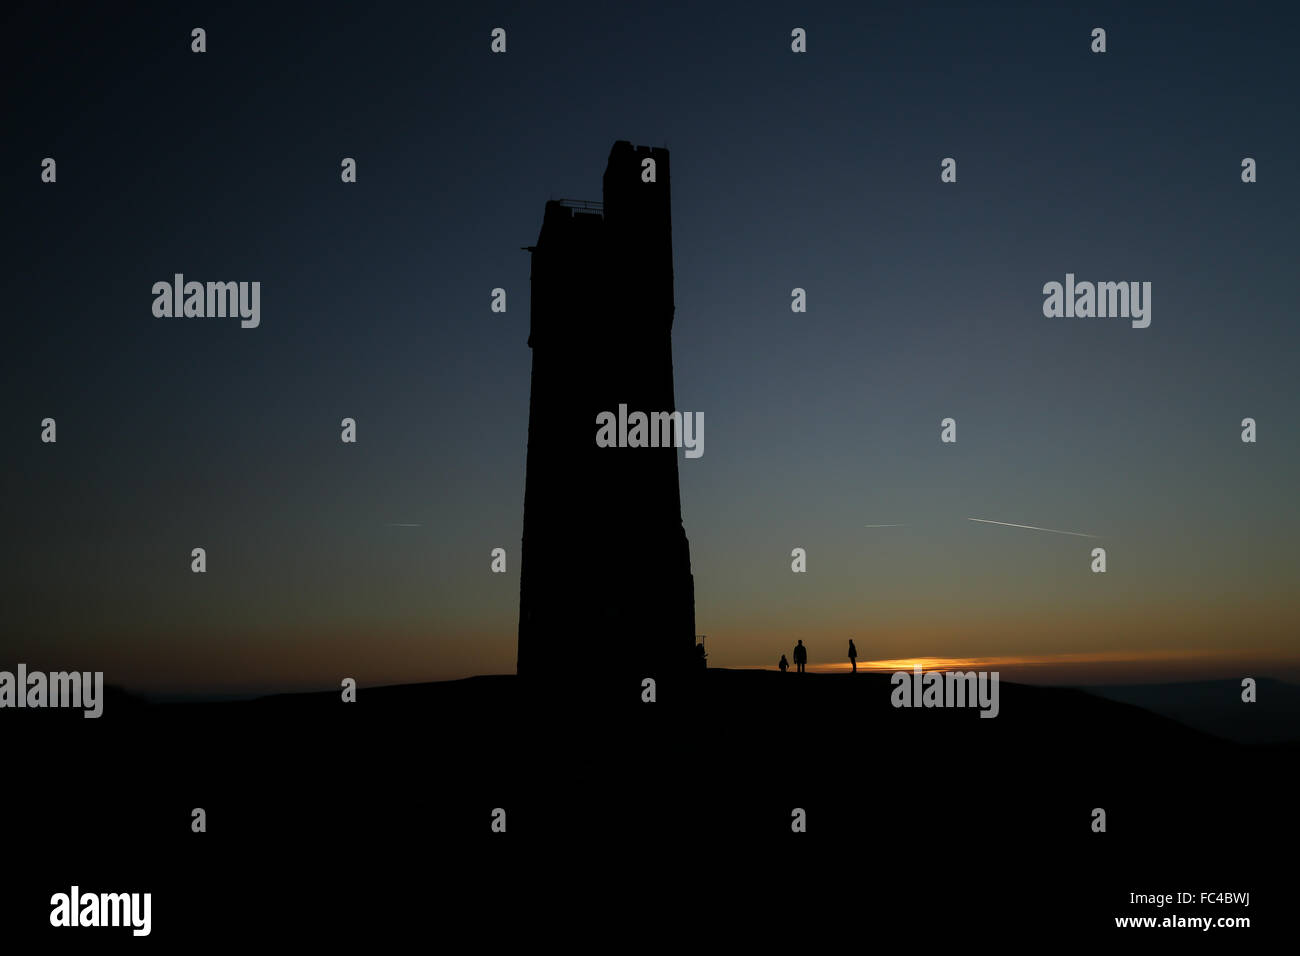 Huddersfield, West Yorks, UK. 20th January, 2016. People watch the sun set over Huddersfield in West Yorkshire, UK, next to the Victoria Tower atop Castle Hill. The UK saw temperatures plummet to below -12 degrees for the second day in a row despite the bright sunny weather across much of the country. Credit:  Ian Hinchliffe/Alamy Live News Stock Photo